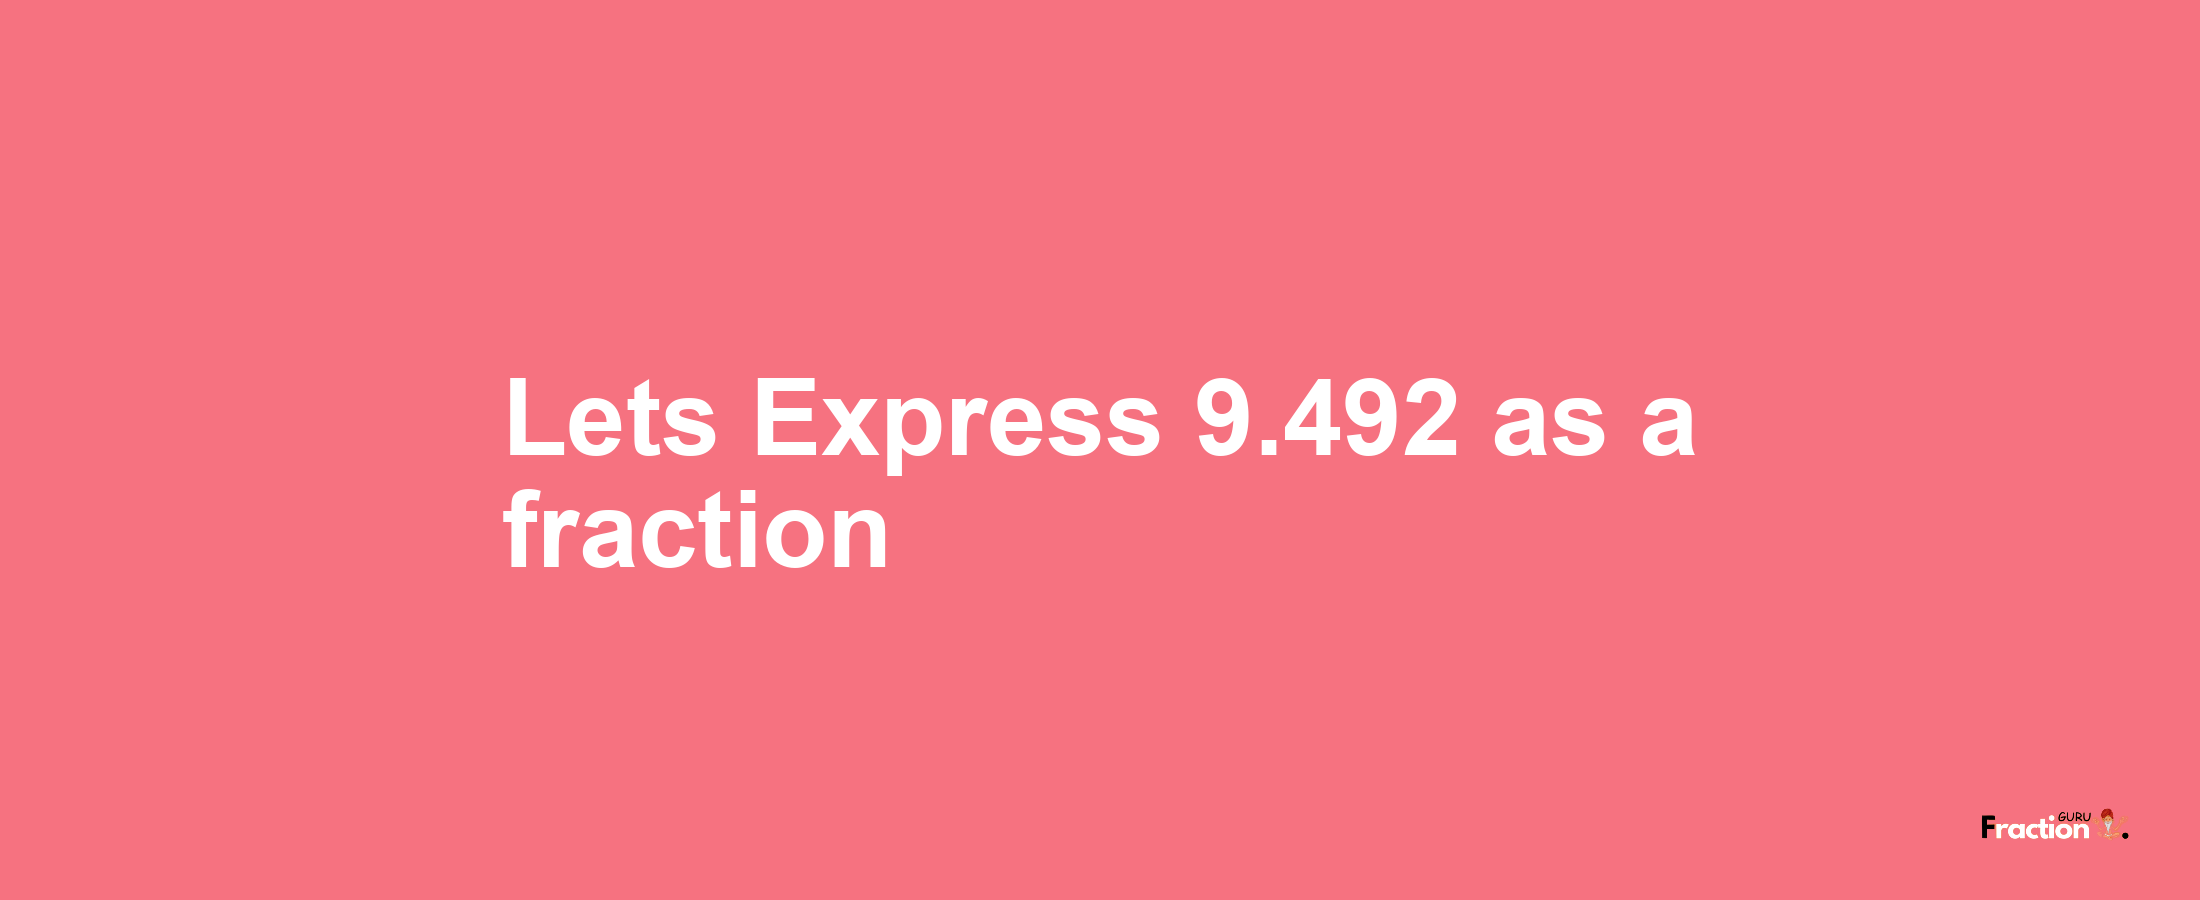 Lets Express 9.492 as afraction